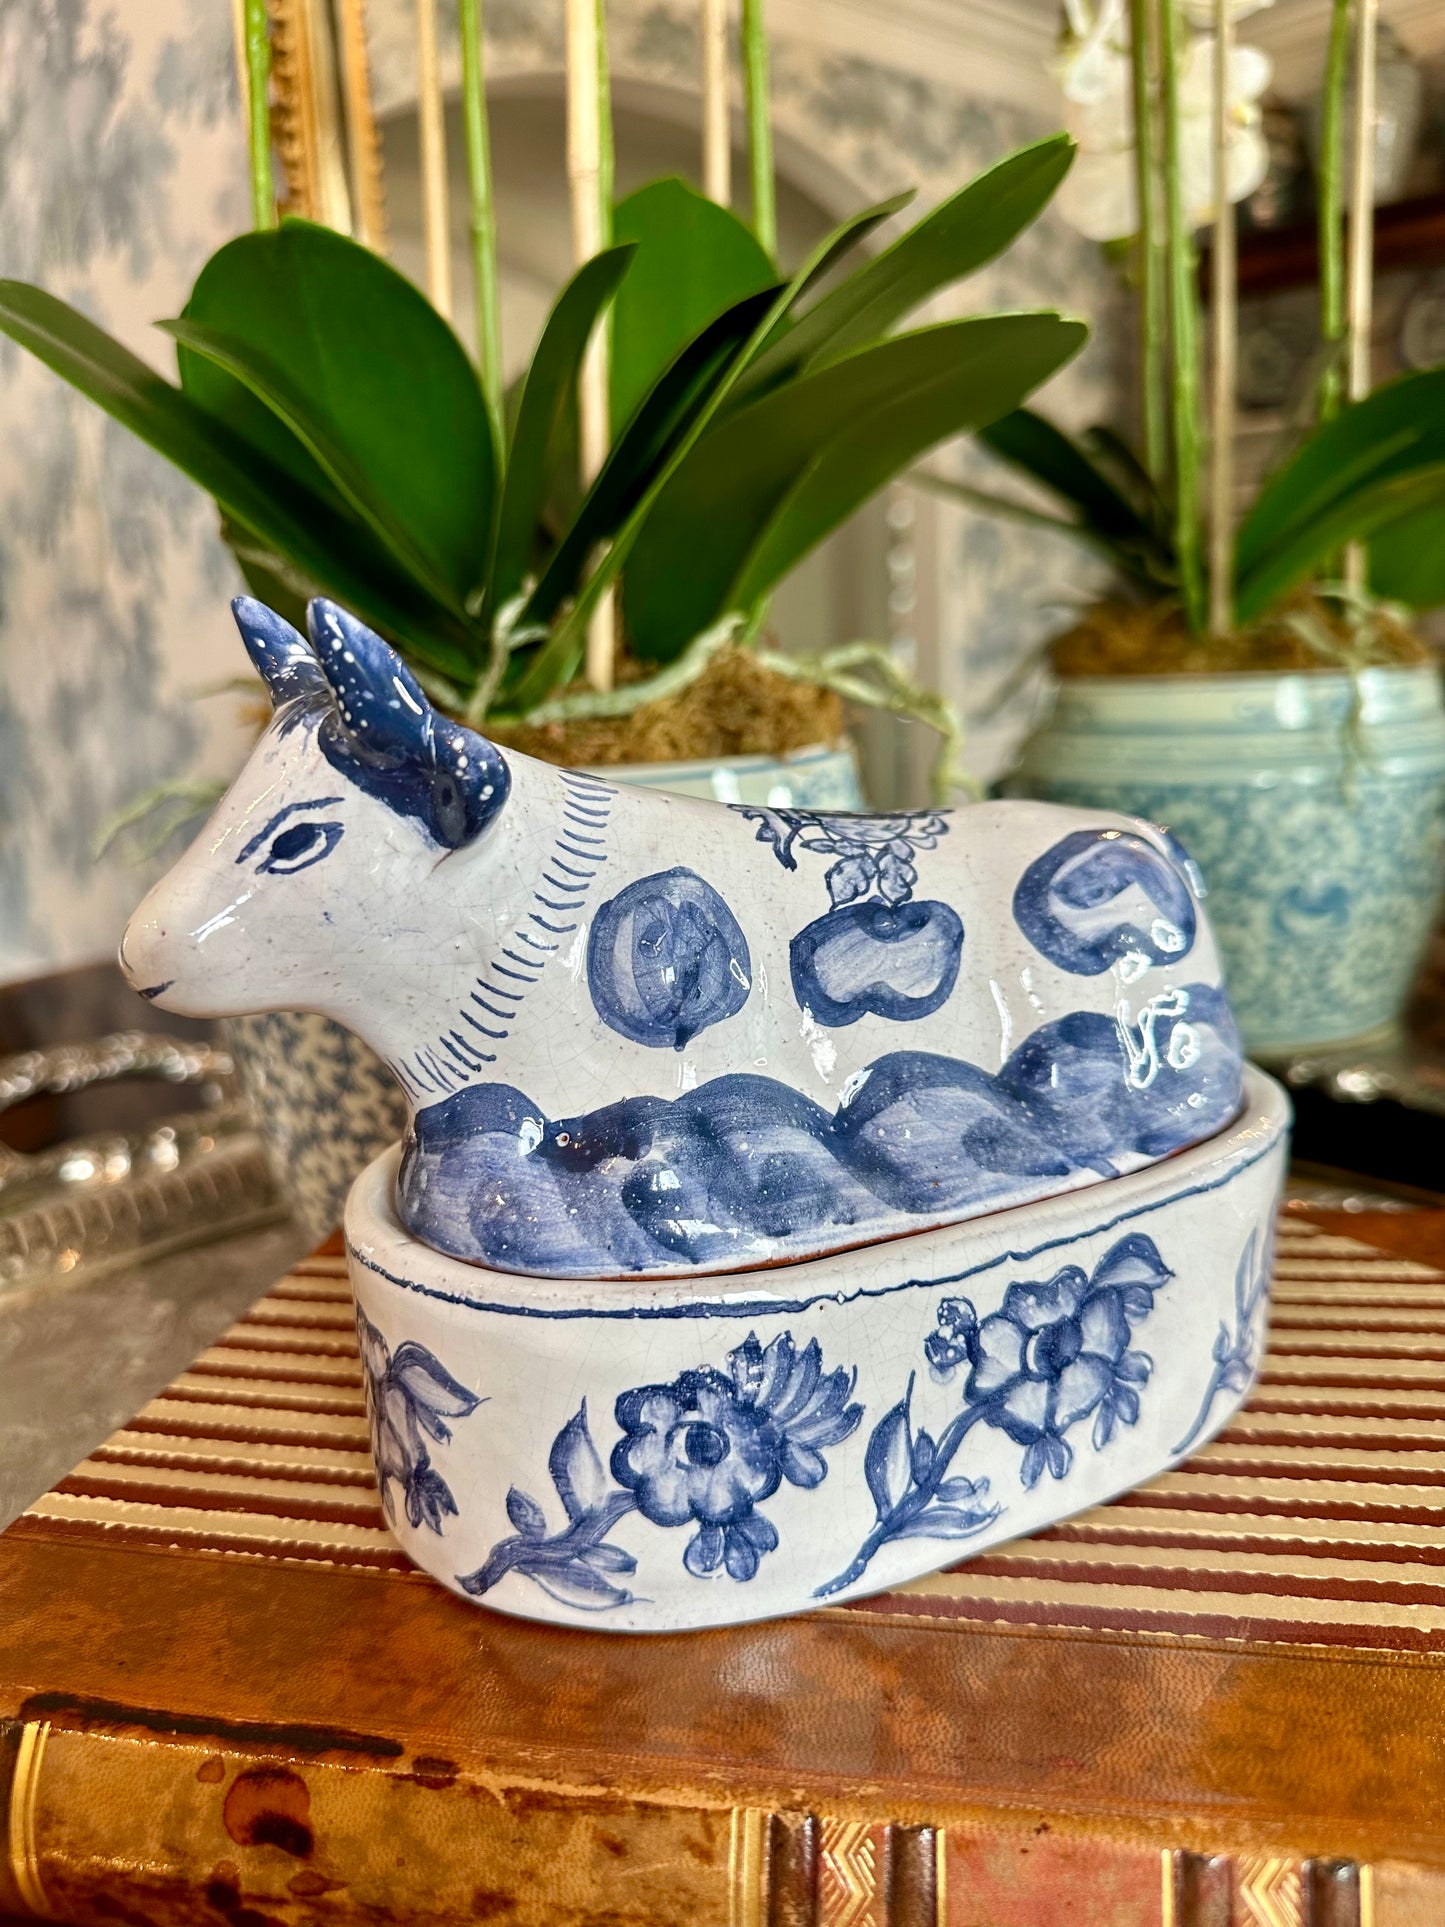 Darling Hand painted Blue & White Portugal Cow Covered Dish